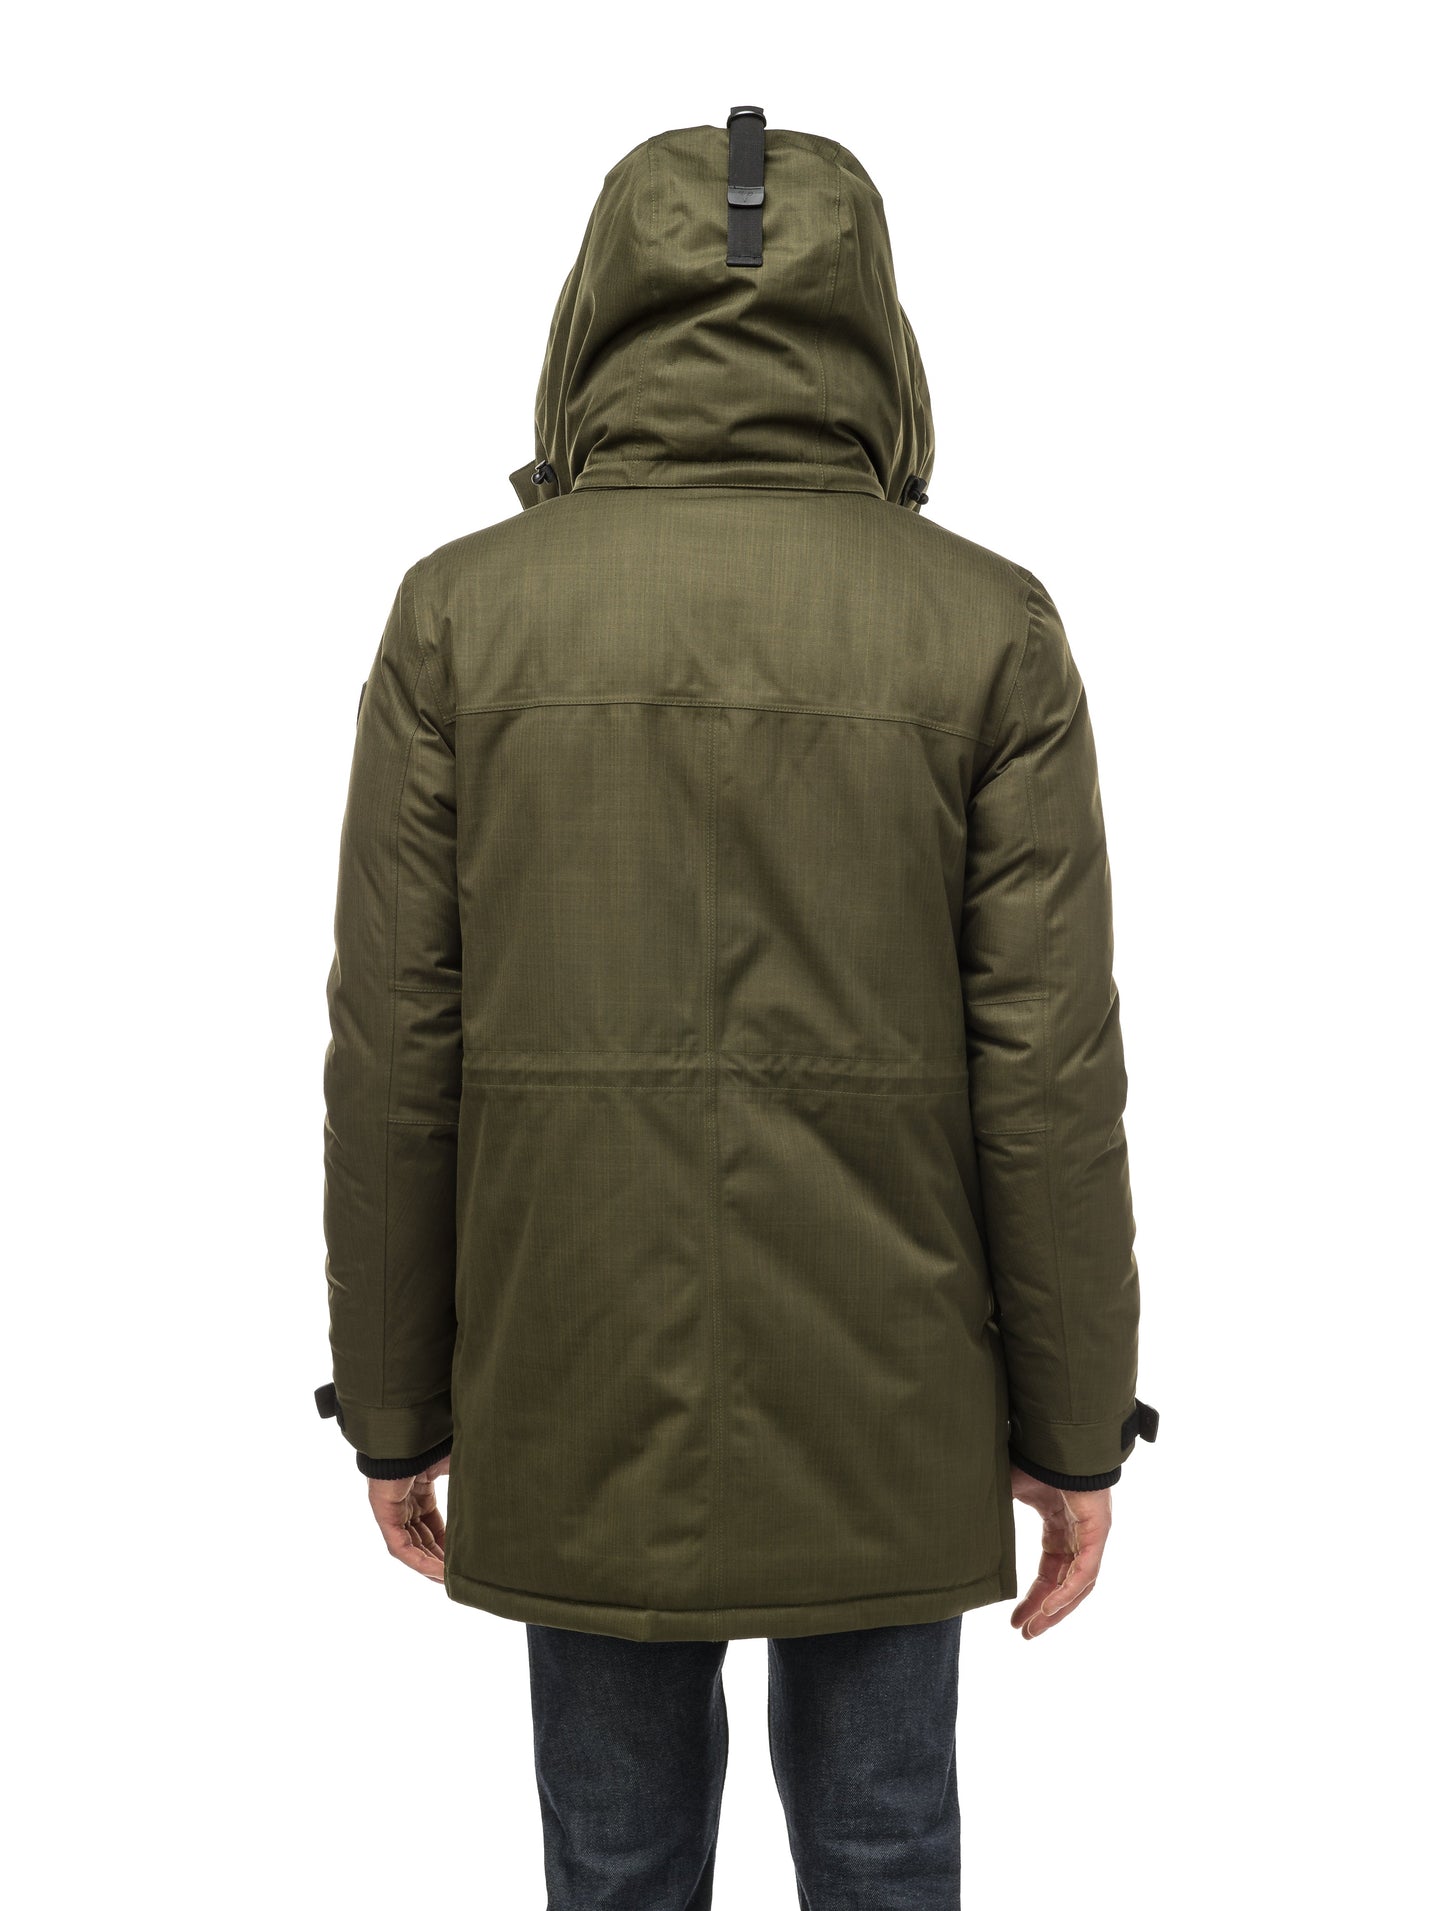 Mid weight men's down filled parka with two patch pockets at the hip and snap closure side vents in Fatigue